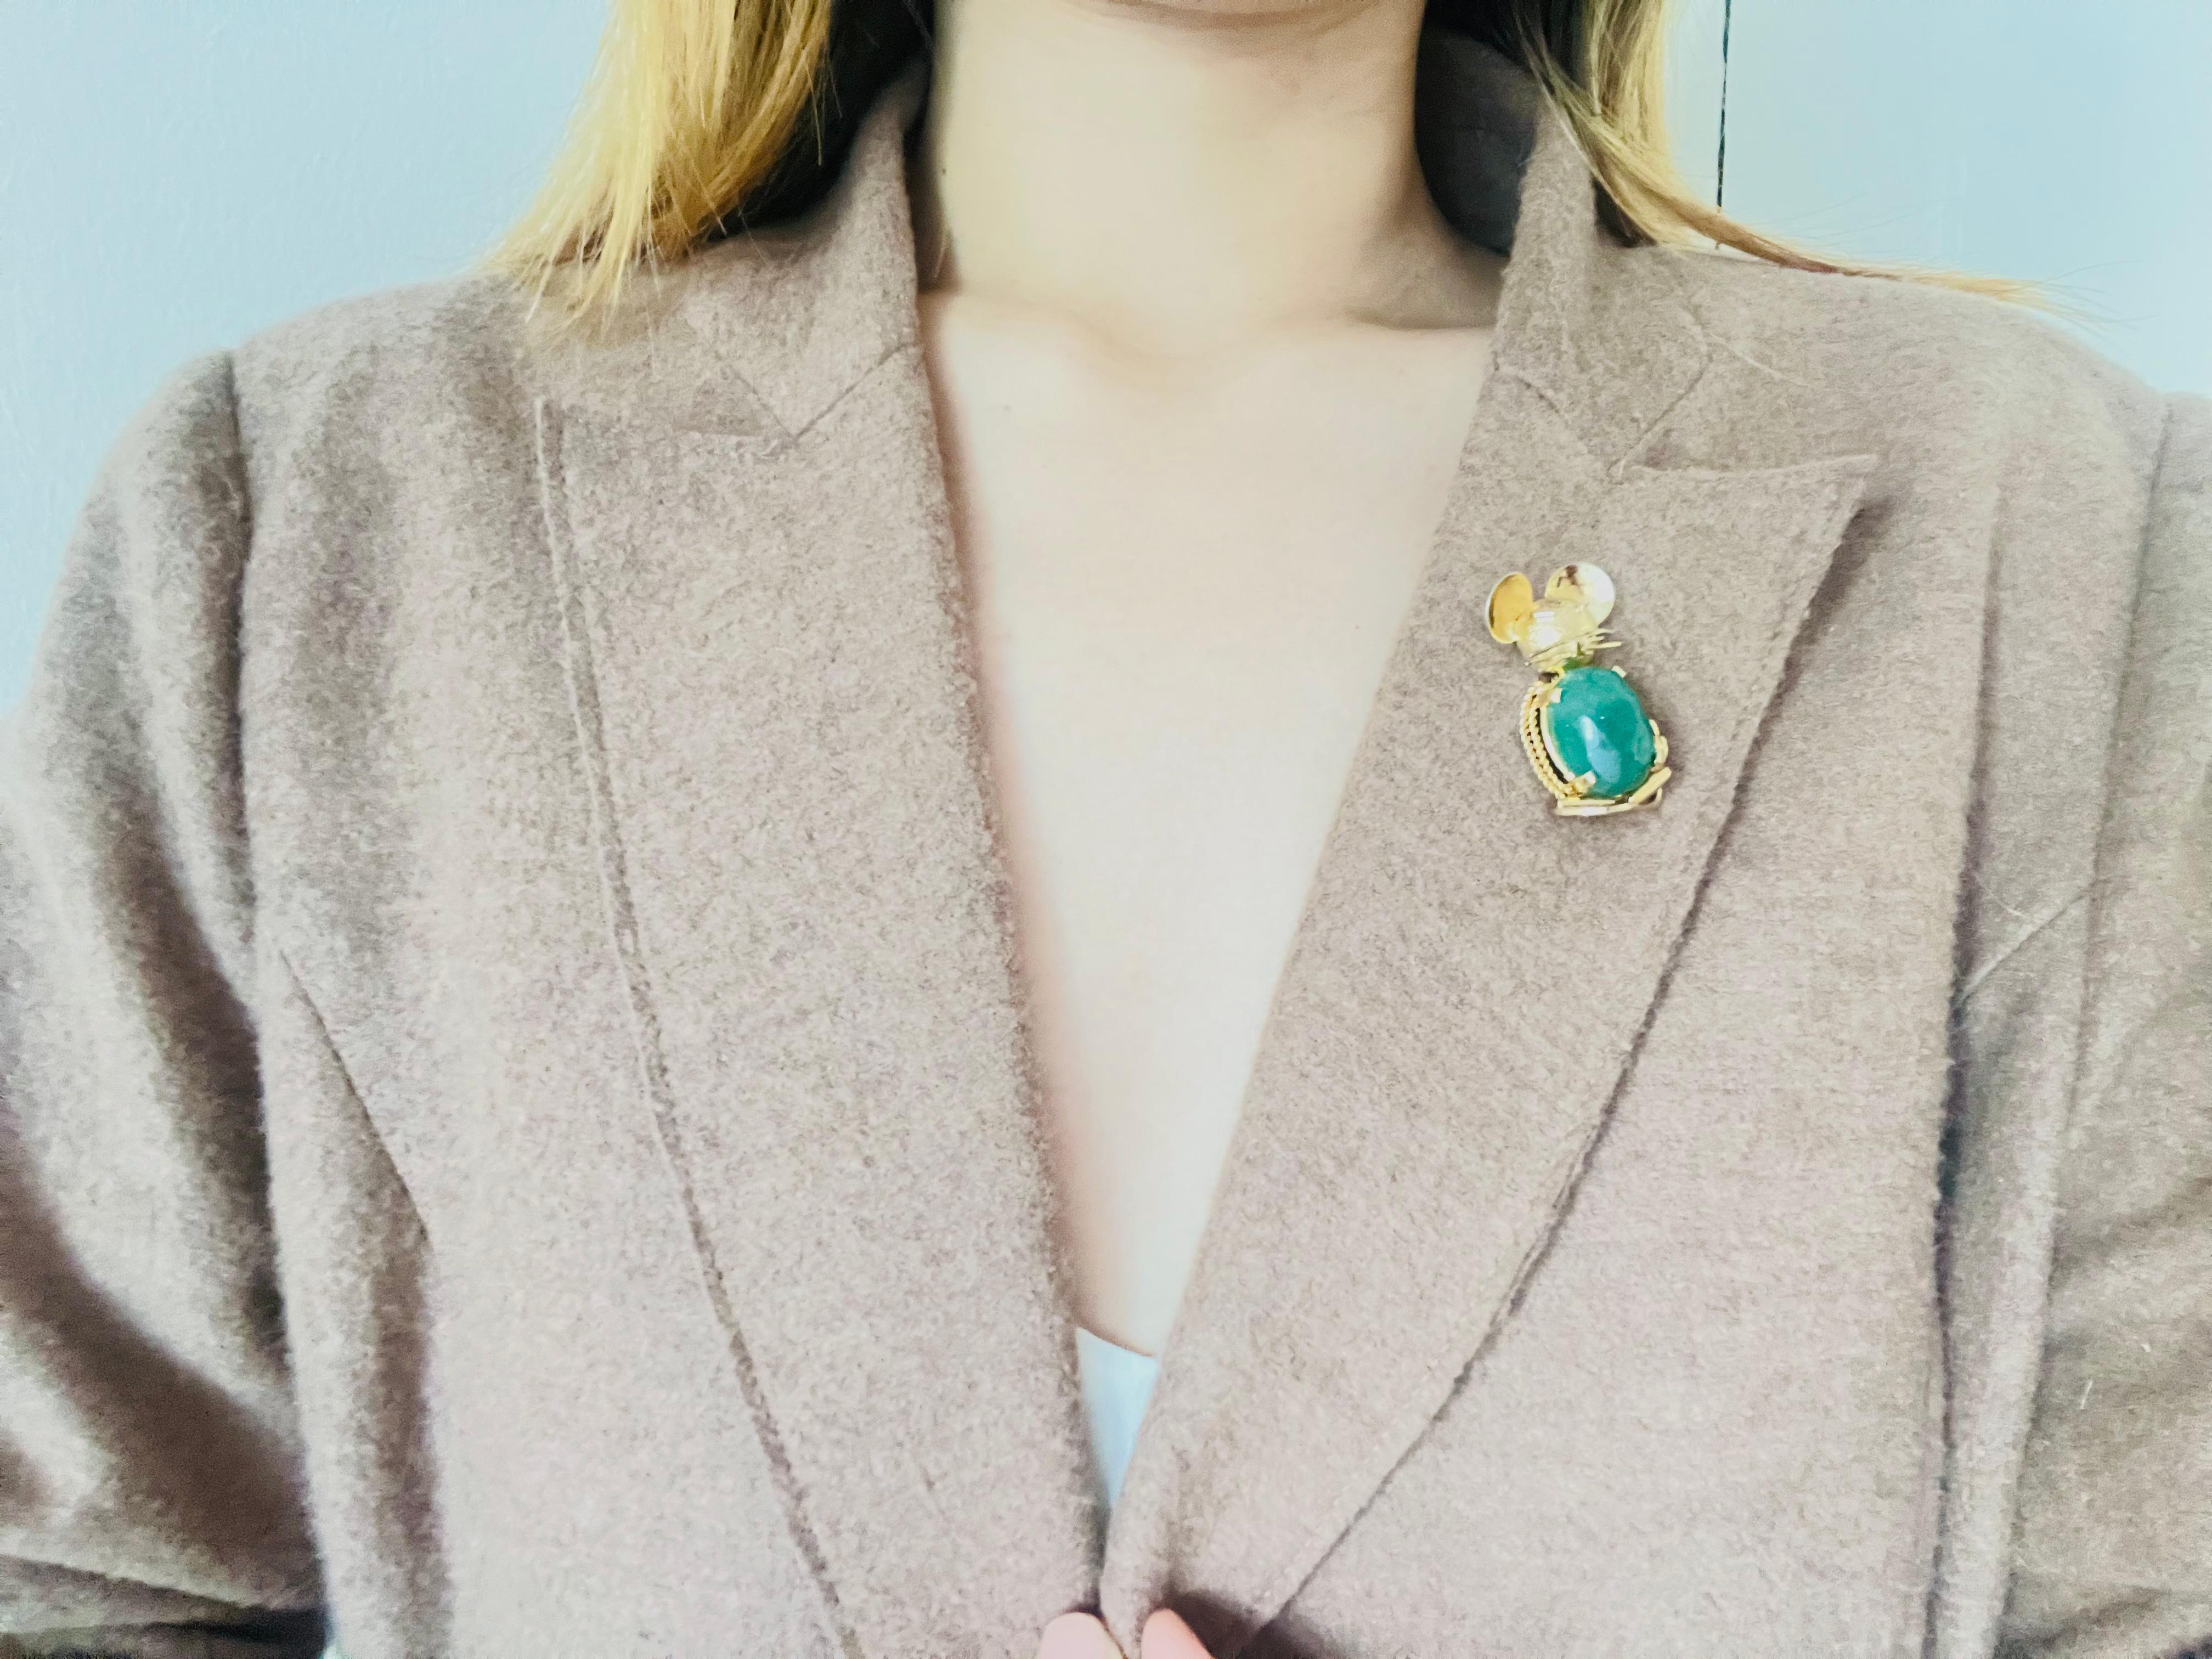 Christian Dior GROSSE 1961 Vintage Vivid Green Emerald Mickey Mouse Gold Brooch In Good Condition For Sale In Wokingham, England